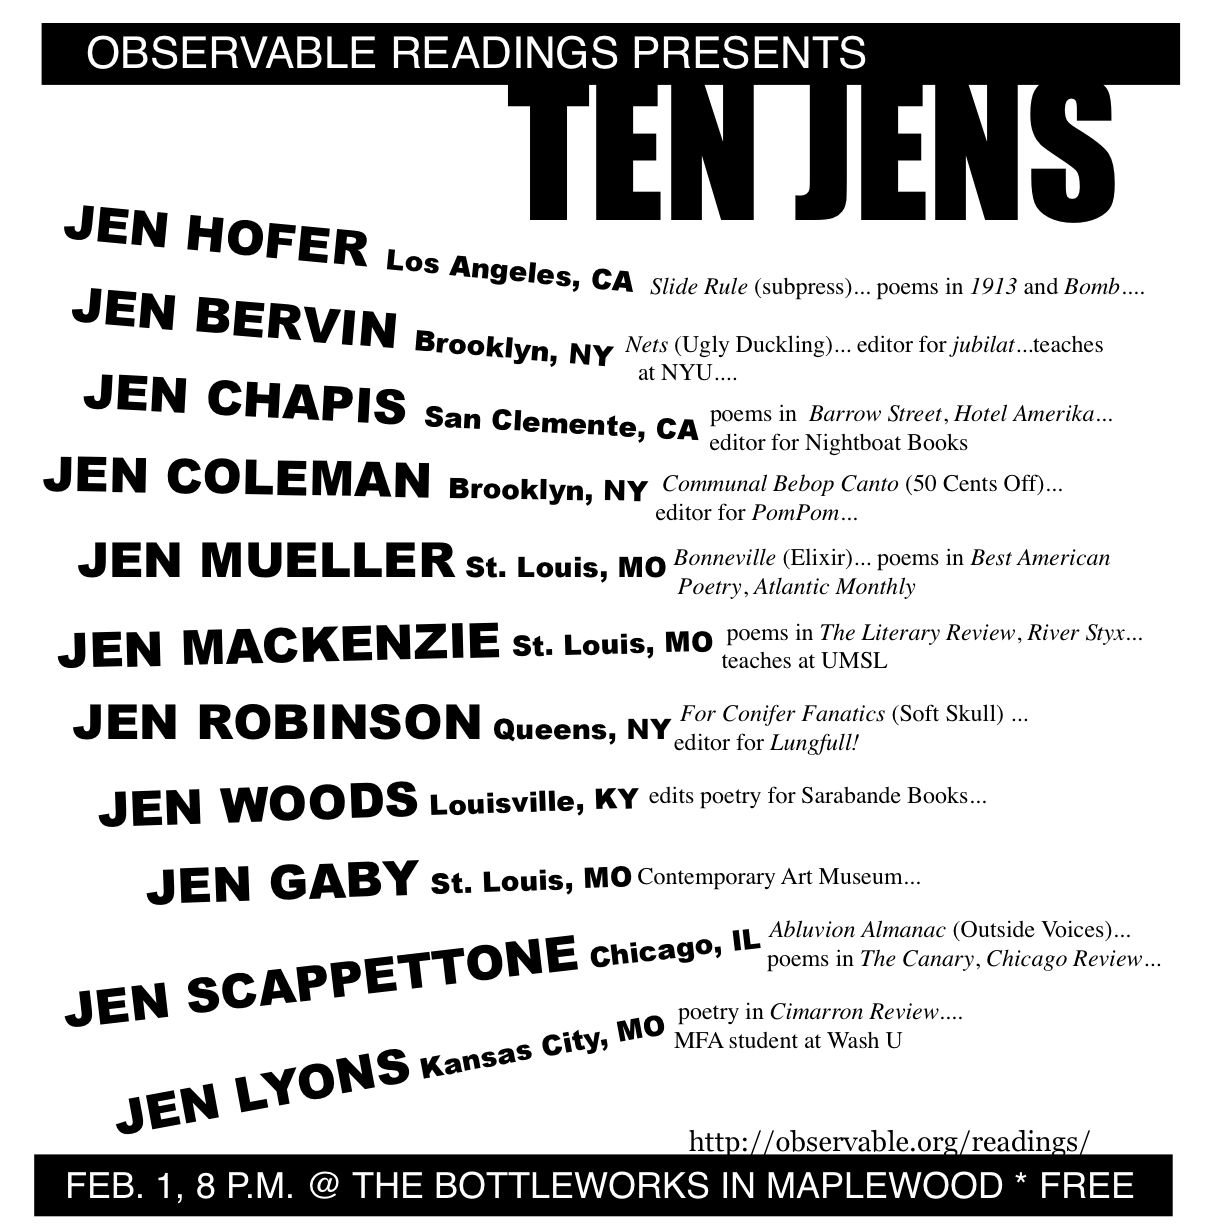 OBSERVABLE READING Maplewood Missouri February 1, 2007: Ten Jens - Hofer, Bervin, Chapis, Robinson, MacKenzie, Coleman, Woods, Scappettone, Gaby, Lyons, and Mueller<br /> <br />Jen Hofer's recent publications include Sin puertas visibles: An Anthology of Contemporary Poetry by Mexican Women (University of Pittsburgh Press, 2003) and slide rule (subpress, 2002). Her work can be found in recent issues of 1913, Bomb, Bombay Gin and Primary Writing.<br /> <br />Jen Bervin is the author of A Non-Breaking Space (uglyducklingpresse.org), Nets (Ugly Duckling Presse 2004) and Under What Is Not Under (Potes & Poets 2001),. Bervin is an editor of the literary journal, jubilat, and teaches at Pratt Institute and New York University.<br /> <br />Jen Chapis is author of the chapbook The Beekeeper's Departure (Backwards City 2007). Recipient of the Florida Review Editor's Prize and GSU Review Poetry Prize, she has published poems in The Iowa Review, McSweeney's, Quarterly West, Best New Poets, etc. Jen is an Editor with Nightboat Books (nightboat.org).<br /> <br />Jen Coleman is a poet in Brooklyn, NY and co-editor of PomPom magazine (pompompress.com). She's also co-author of the chapbook Communal Bebop Canto with CE Putnam and Allison Cobb.<br /> <br />Jen MacKenzie teaches literature and writing at UM St. Louis. Her work has appeared in a number of publications, among them The Literary Review, Feminist Studies, The Christian Science Monitor, Unitarian-Universalist Poets, and, locally, River Styx, Delmar, and Sou'wester.<br /> <br />Jen Robinson is the author of For Conifer Fanatics (Soft Skull, 1996) and the chapbooks What Solitary Ocean and Late Night Clanging (with artist Elizabeth Zechel). She serves as puzzle editor for Lungfull! magazine and makes her home in Queens, New York.<br /> <br />Jen Woods is a poet and short fiction writer from Louisville, Kentucky. She serves as an editorial and marketing assistant for Sarabande Books, an independent literary press (sarabandebooks.org).<br /> <br />Jen Gaby studied Creative Writing at University of Indiana and is a fierce advocate for the literary arts in St. Louis. During daylight hours, she serves as the public relations manager for the Contemporary Art Museum.<br /> <br />Jen Scappettone's Abluvion Almanac will be out imminently from Outside Voices. Poems, translations from Italian, and prose have appeared lately in Bay Poetics, P-Queue, The Canary, The Brooklyn Rail, Chicago Review, and other places. She lives in Chicago.<br /> <br />Jen Lyons is from Kansas City and is currently attending the Washington University MFA program; she has had a poem published in Cimarron Review.<br /> <br />Jen Mueller's new collection, Bonneville, comes out this spring from Elixir Books. She teaches poetry and fiction writing at McKendree College.